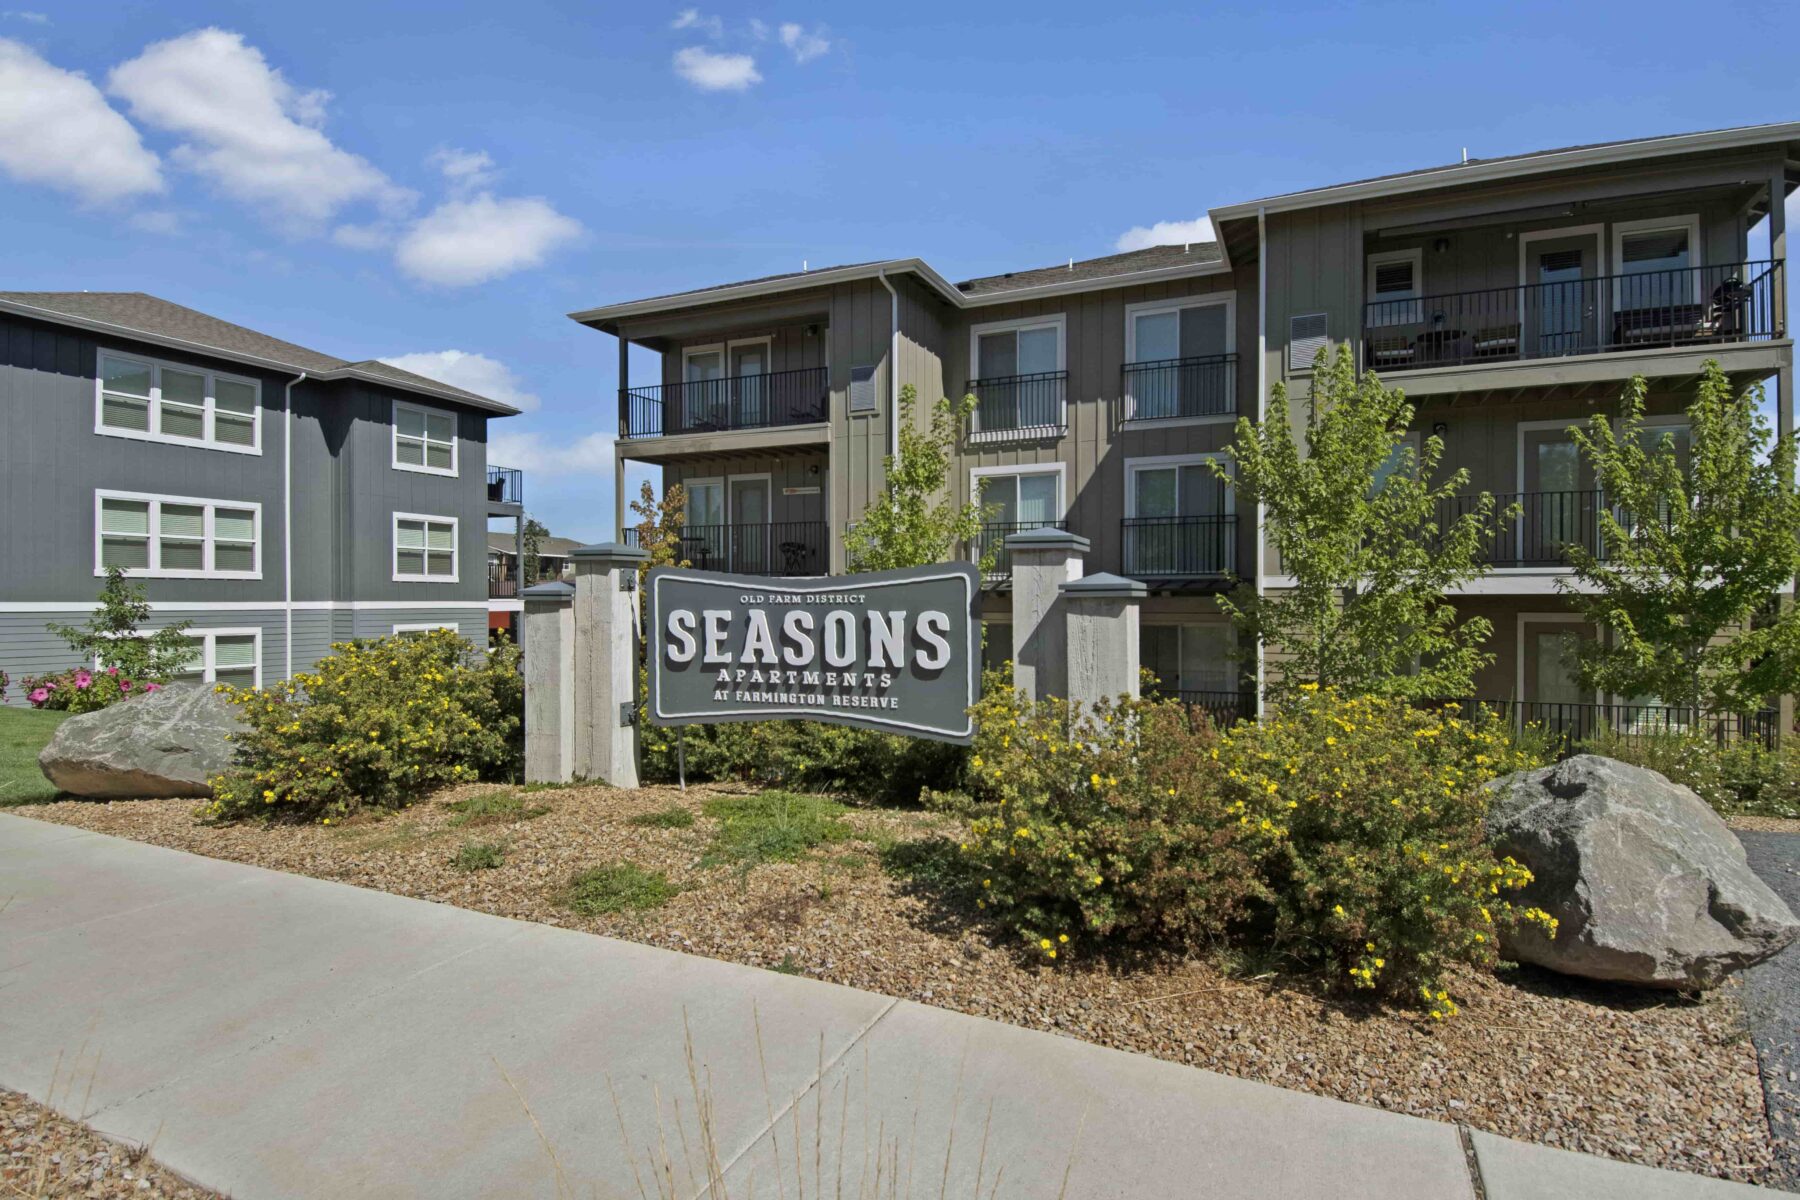 A wide shot of the property with a sign reading ‘SEASONS APARTMENTS’ in front.